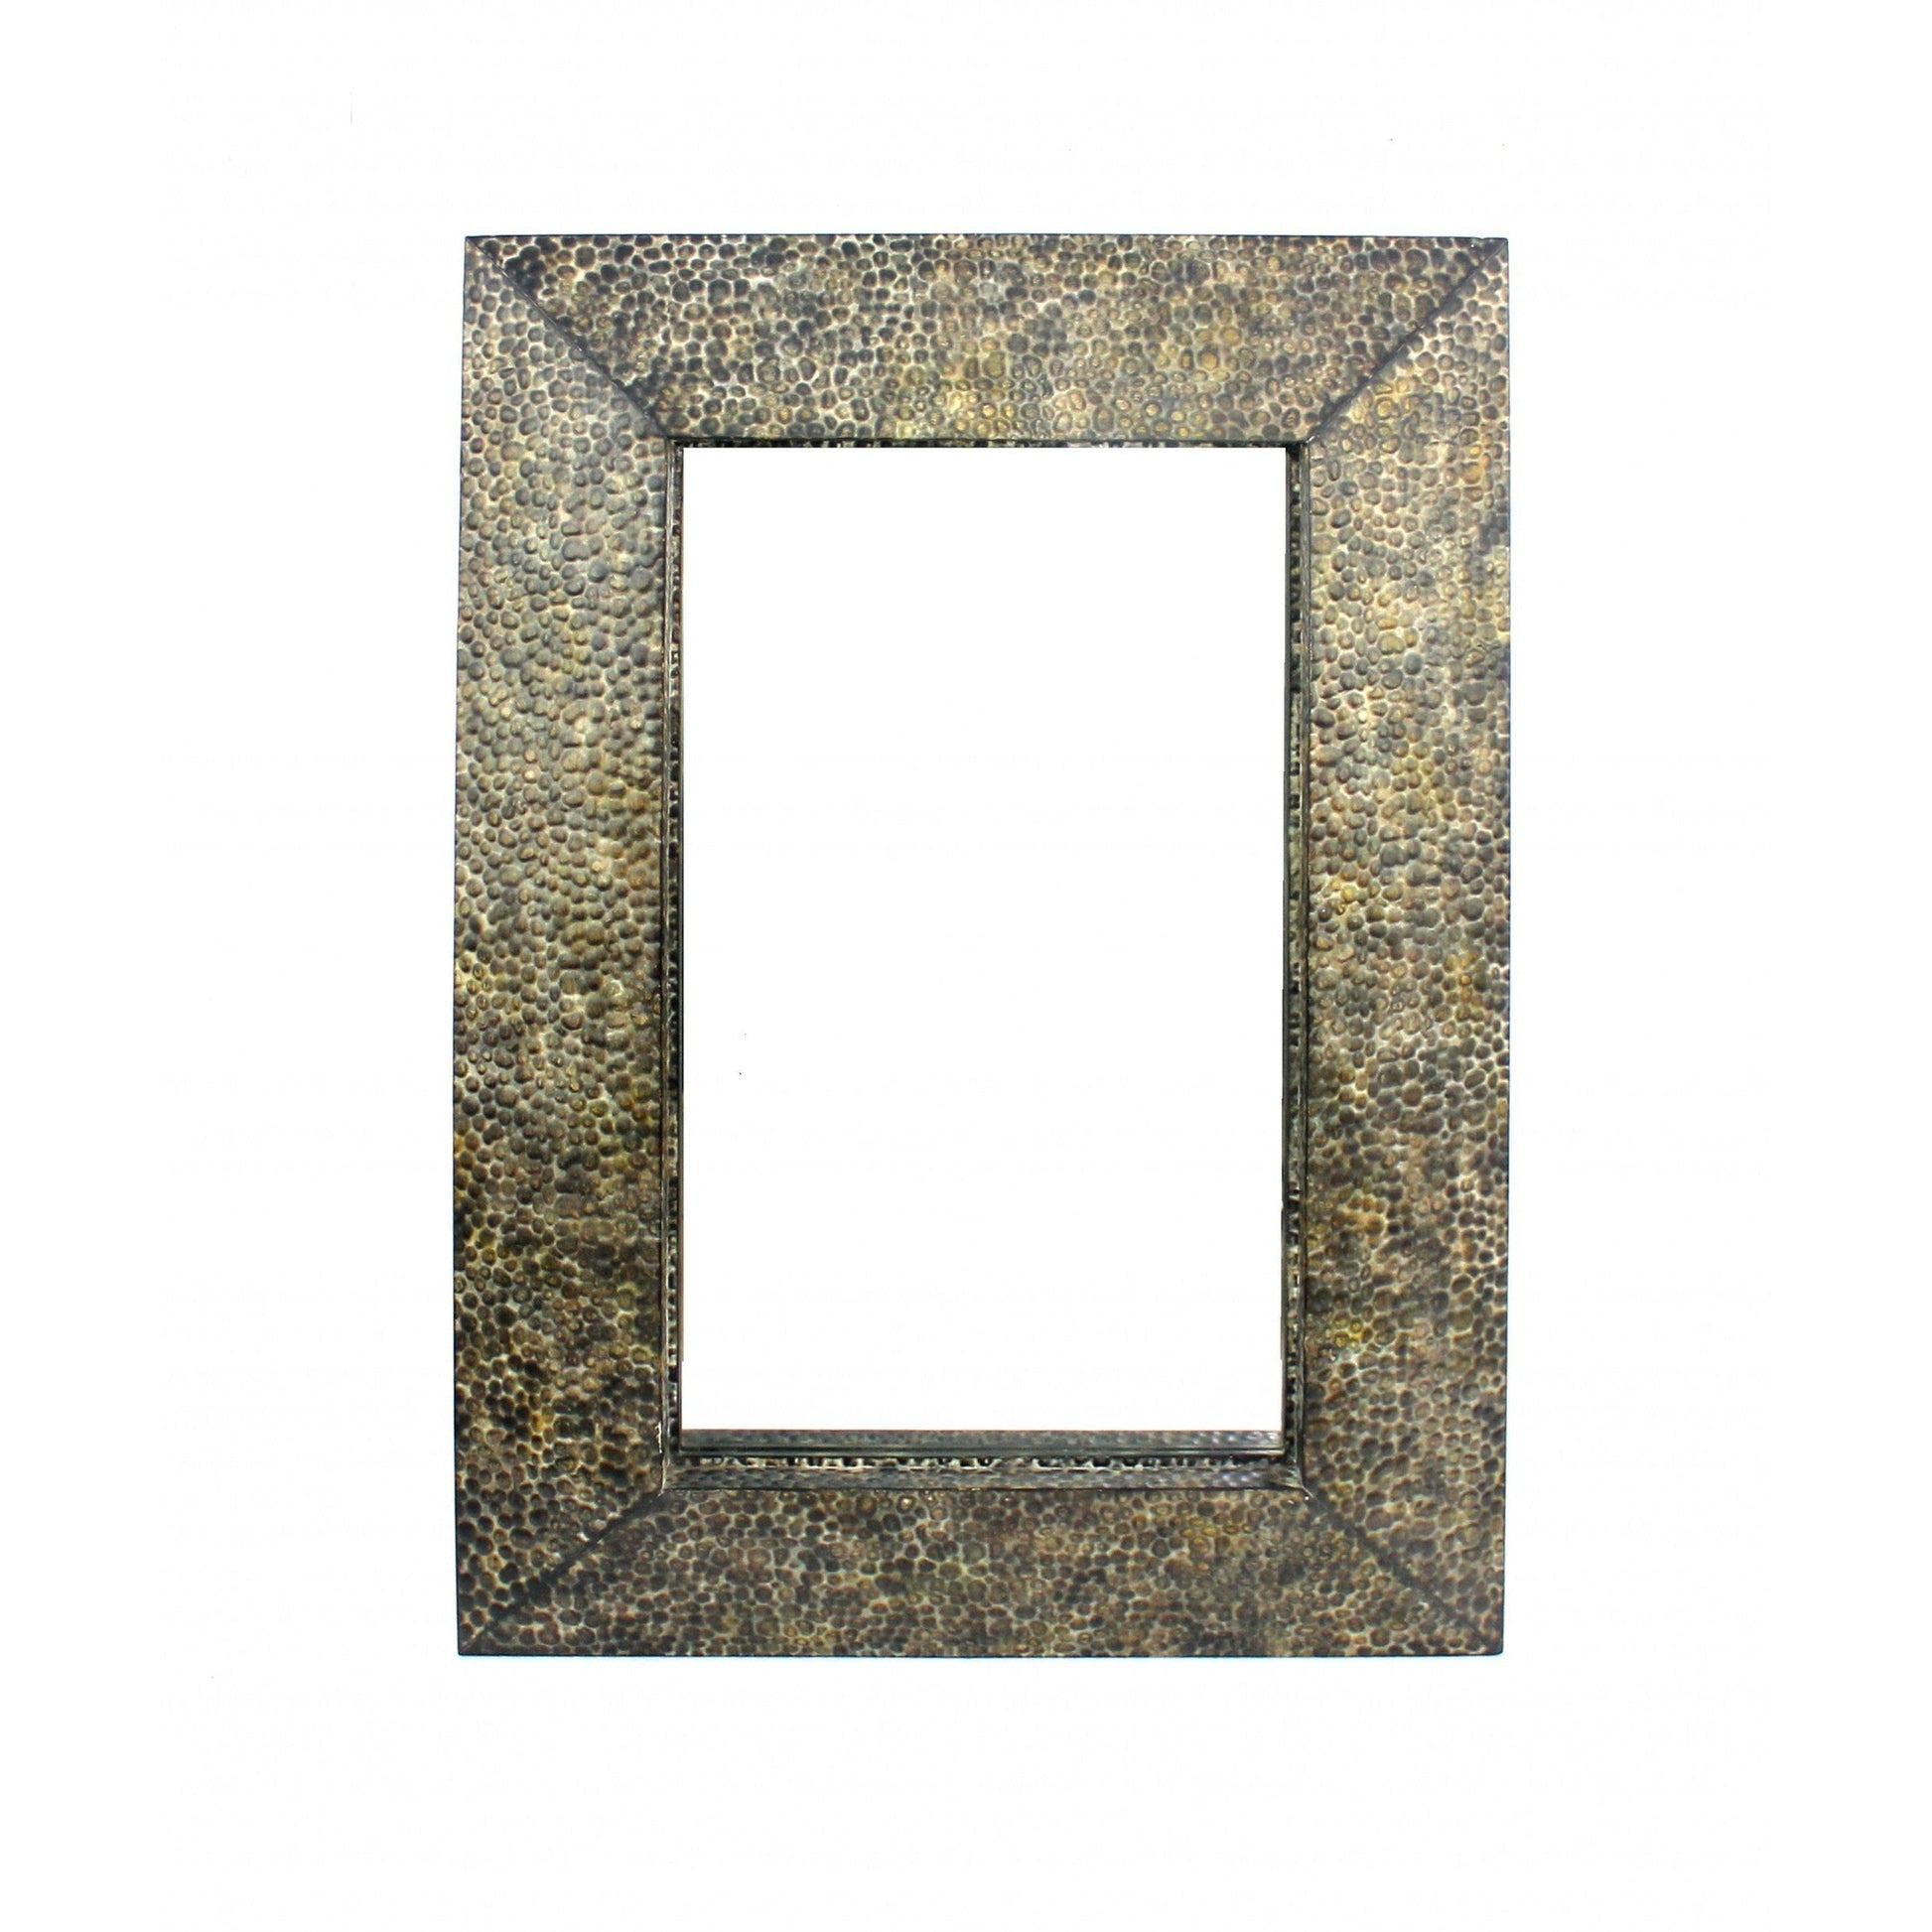 HomeRoots Dressing Mirror With Gravel-Like Mosaic Frame In Bronze Finish